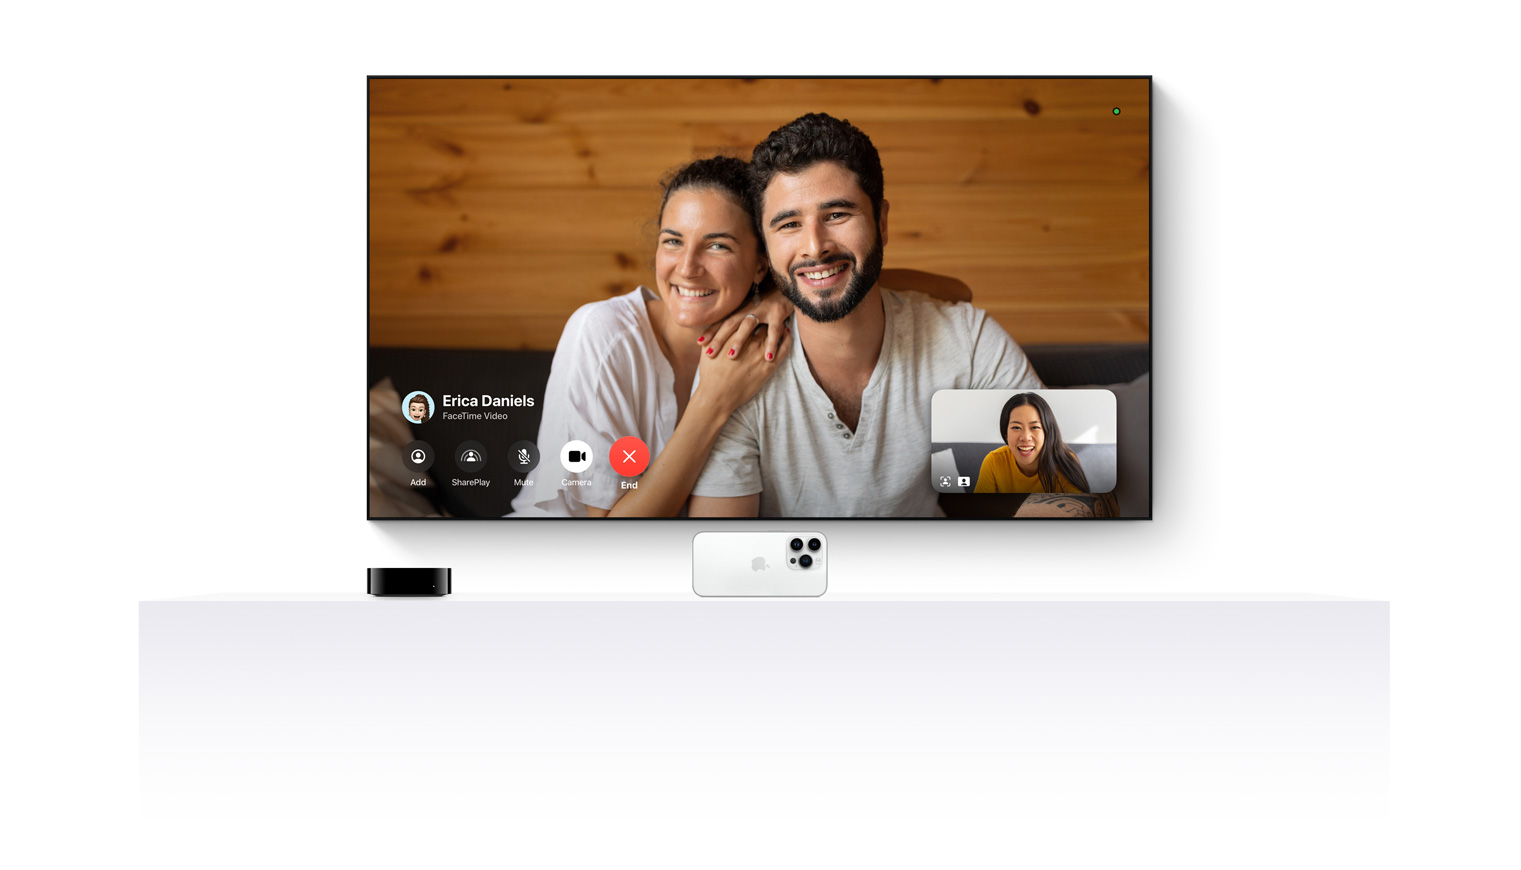 Apple TV 4k and an iPhone working together to bring FaceTime to a flat screen television